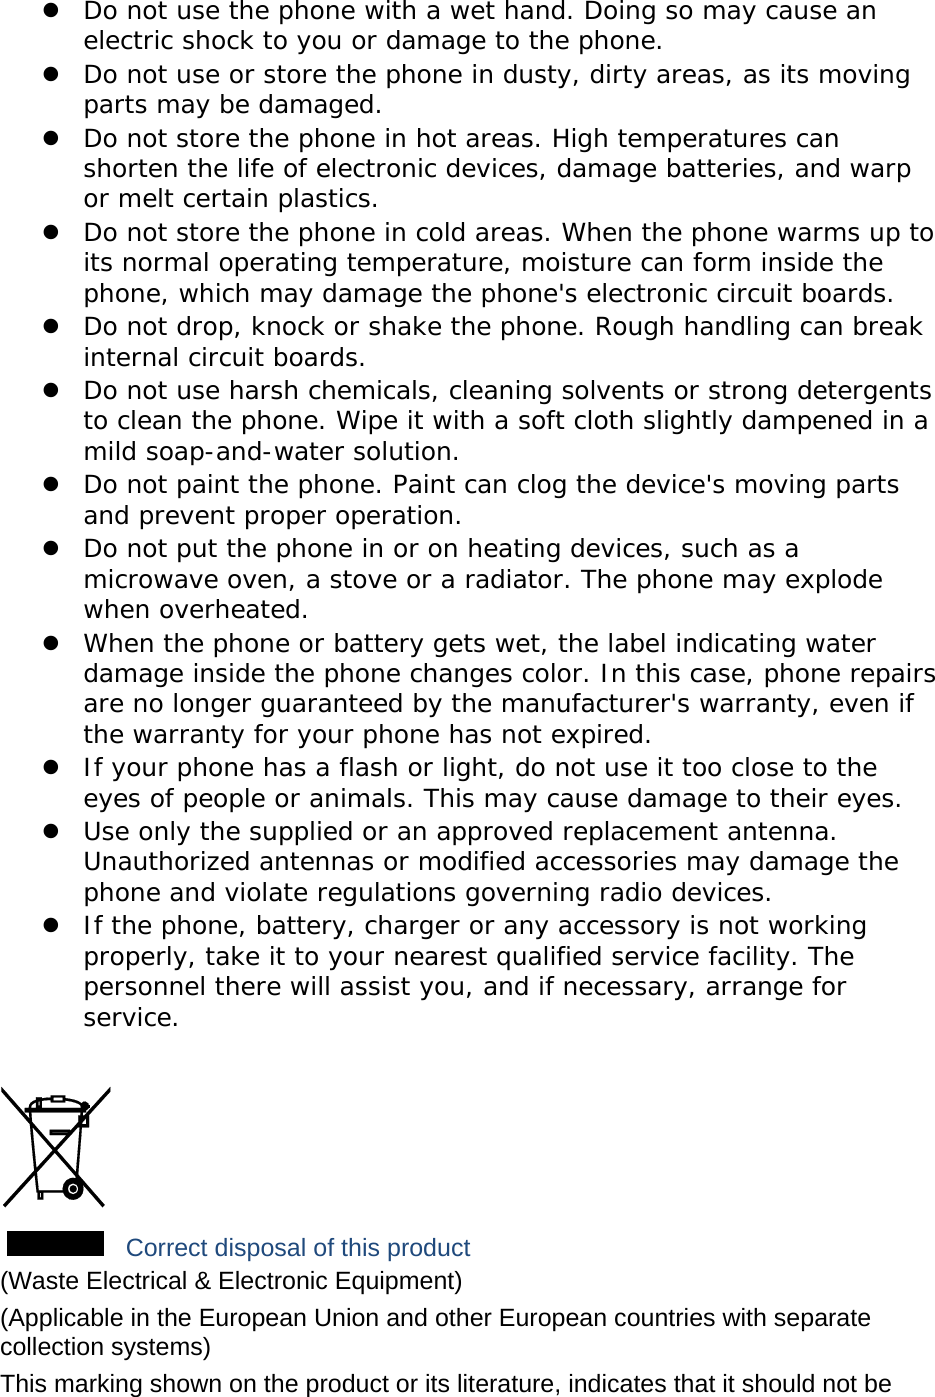 z Do not use the phone with a wet hand. Doing so may cause an electric shock to you or damage to the phone. z Do not use or store the phone in dusty, dirty areas, as its moving parts may be damaged. z Do not store the phone in hot areas. High temperatures can shorten the life of electronic devices, damage batteries, and warp or melt certain plastics. z Do not store the phone in cold areas. When the phone warms up to its normal operating temperature, moisture can form inside the phone, which may damage the phone&apos;s electronic circuit boards. z Do not drop, knock or shake the phone. Rough handling can break internal circuit boards. z Do not use harsh chemicals, cleaning solvents or strong detergents to clean the phone. Wipe it with a soft cloth slightly dampened in a mild soap-and-water solution. z Do not paint the phone. Paint can clog the device&apos;s moving parts and prevent proper operation. z Do not put the phone in or on heating devices, such as a microwave oven, a stove or a radiator. The phone may explode when overheated. z When the phone or battery gets wet, the label indicating water damage inside the phone changes color. In this case, phone repairs are no longer guaranteed by the manufacturer&apos;s warranty, even if the warranty for your phone has not expired.  z If your phone has a flash or light, do not use it too close to the eyes of people or animals. This may cause damage to their eyes. z Use only the supplied or an approved replacement antenna. Unauthorized antennas or modified accessories may damage the phone and violate regulations governing radio devices. z If the phone, battery, charger or any accessory is not working properly, take it to your nearest qualified service facility. The personnel there will assist you, and if necessary, arrange for service.   Correct disposal of this product (Waste Electrical &amp; Electronic Equipment) (Applicable in the European Union and other European countries with separate collection systems) This marking shown on the product or its literature, indicates that it should not be 